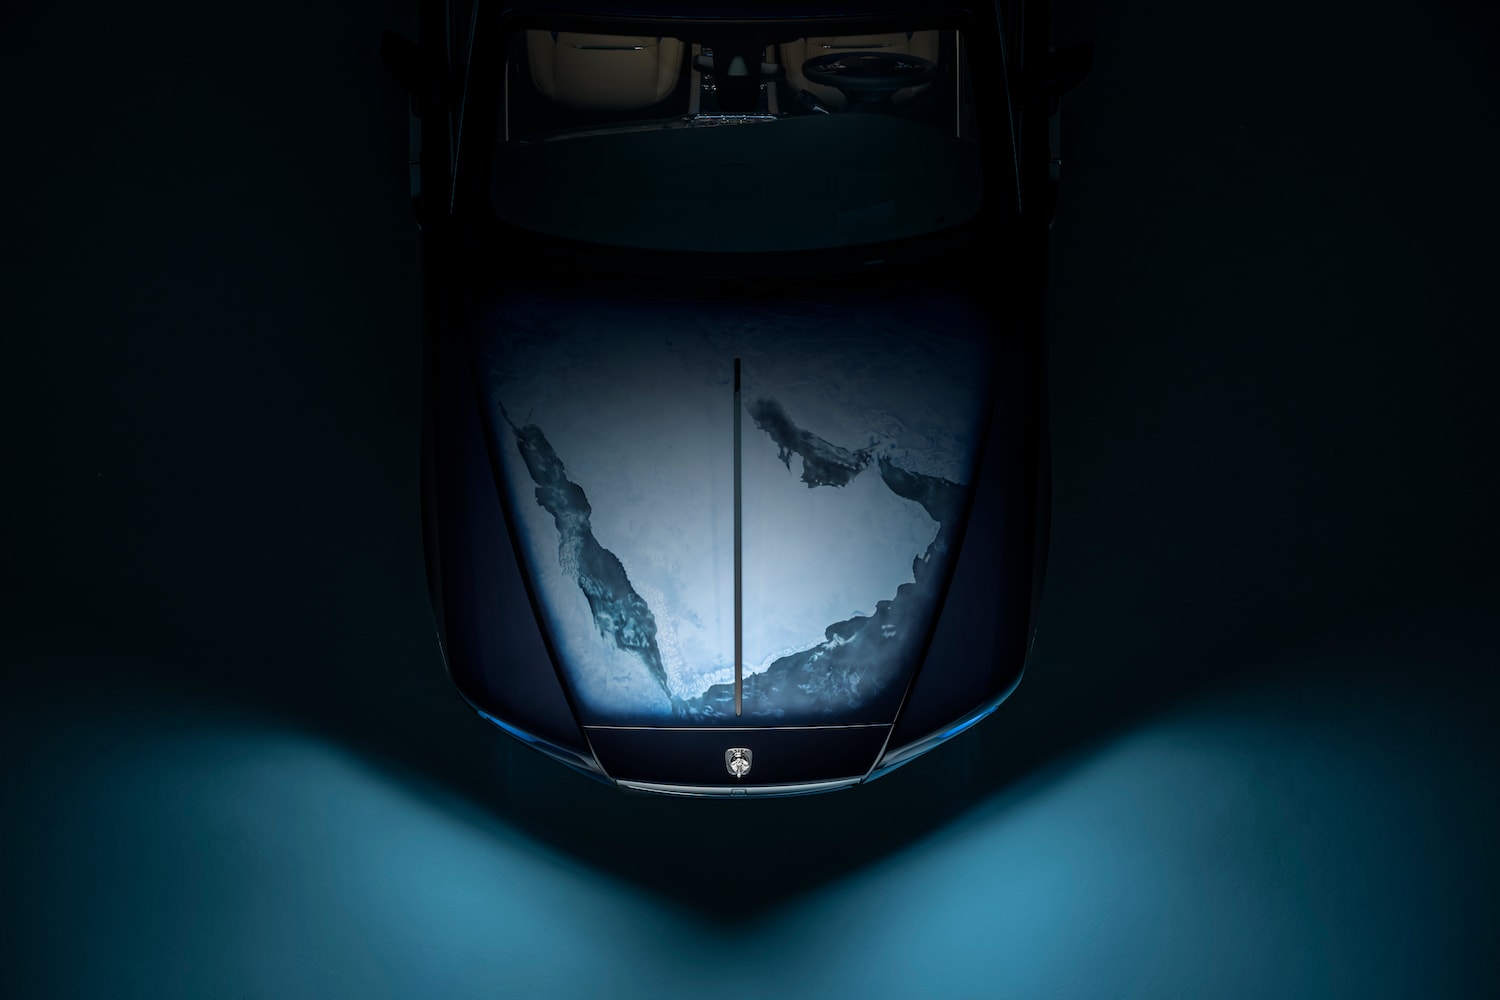 The emphasis on Earth and the entire solar system has been brought about with extreme precision and skill on the Bespoke Wraith.